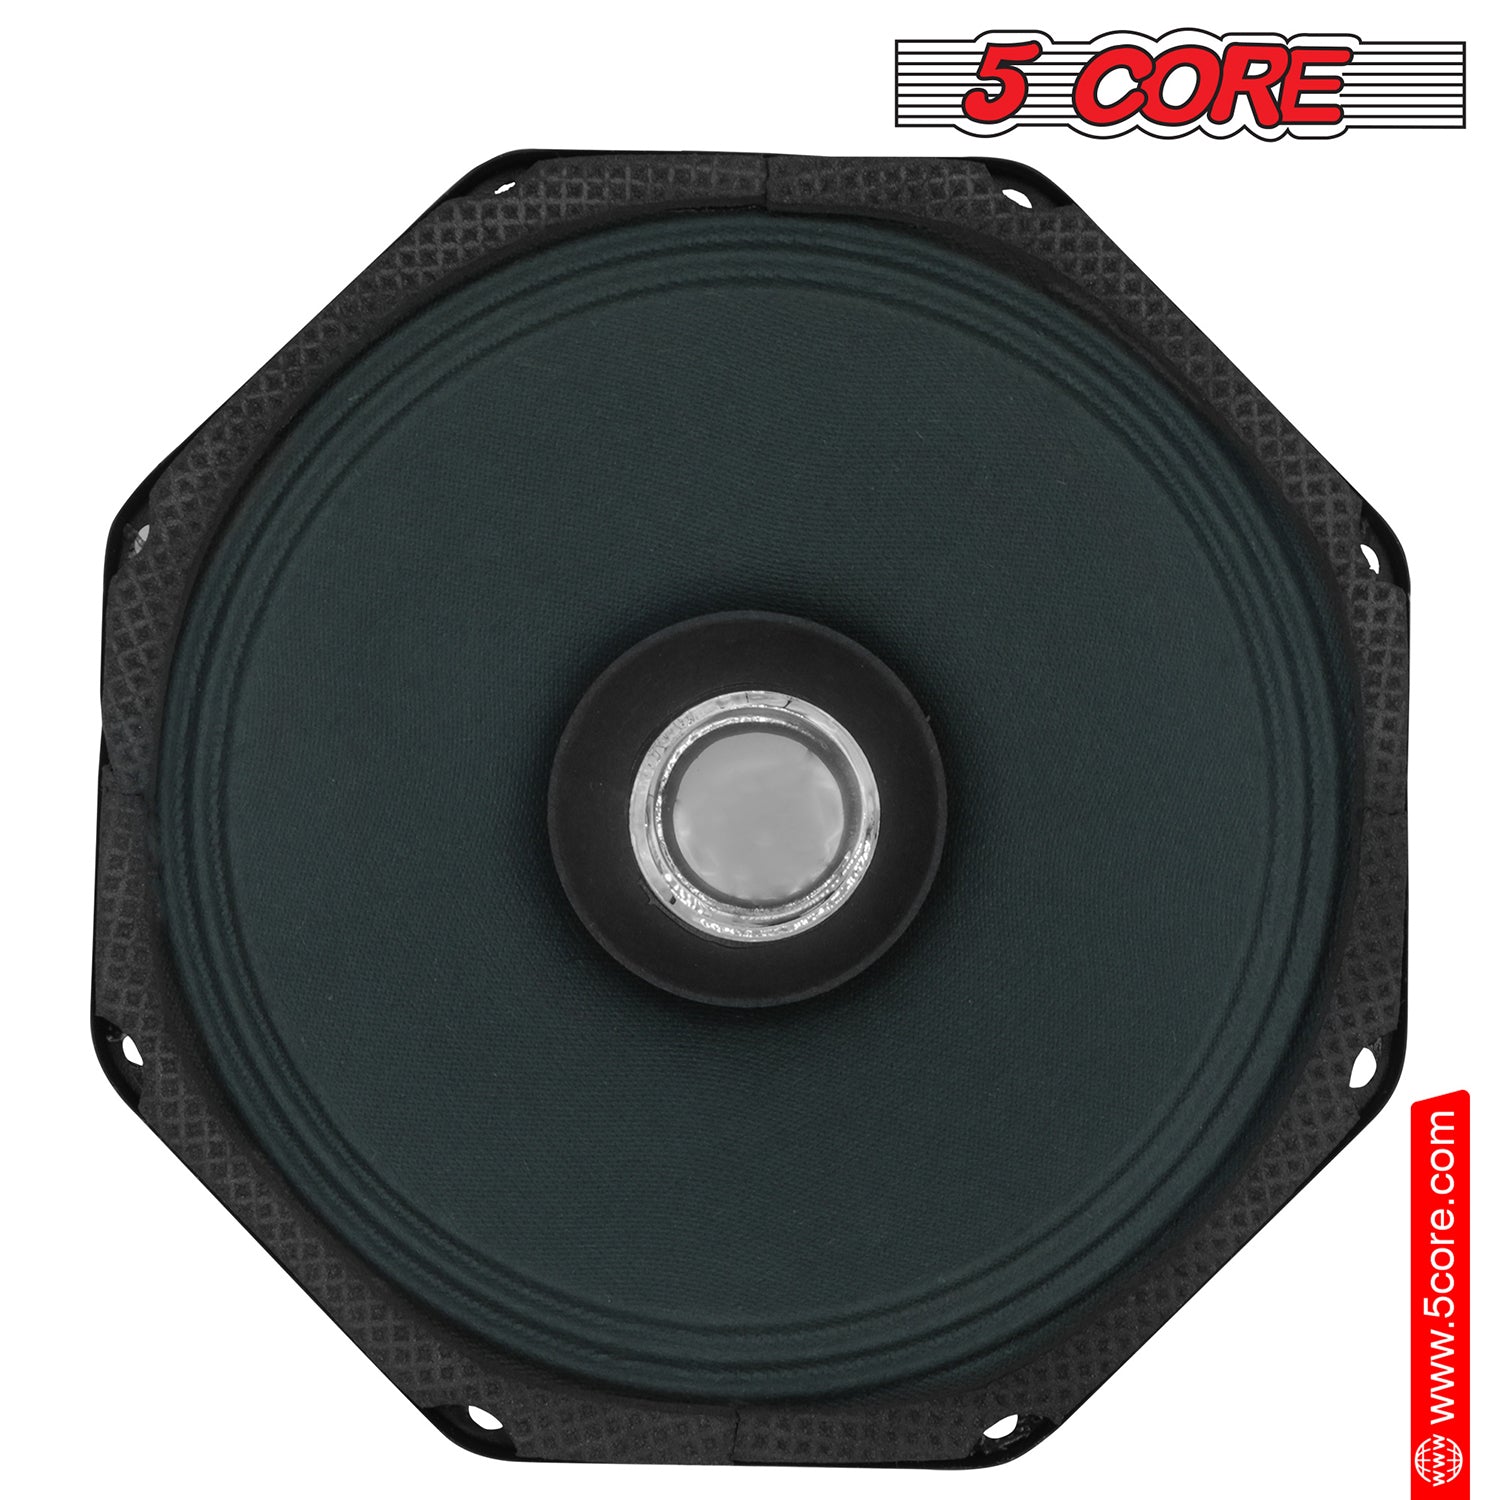 5 Core Speakers 6 Inch Replacement Car Audio Speaker Driver 300 Watts PMPO 30W RMS 4 Ohm Raw Bocinas Para Carro for DJ PA System